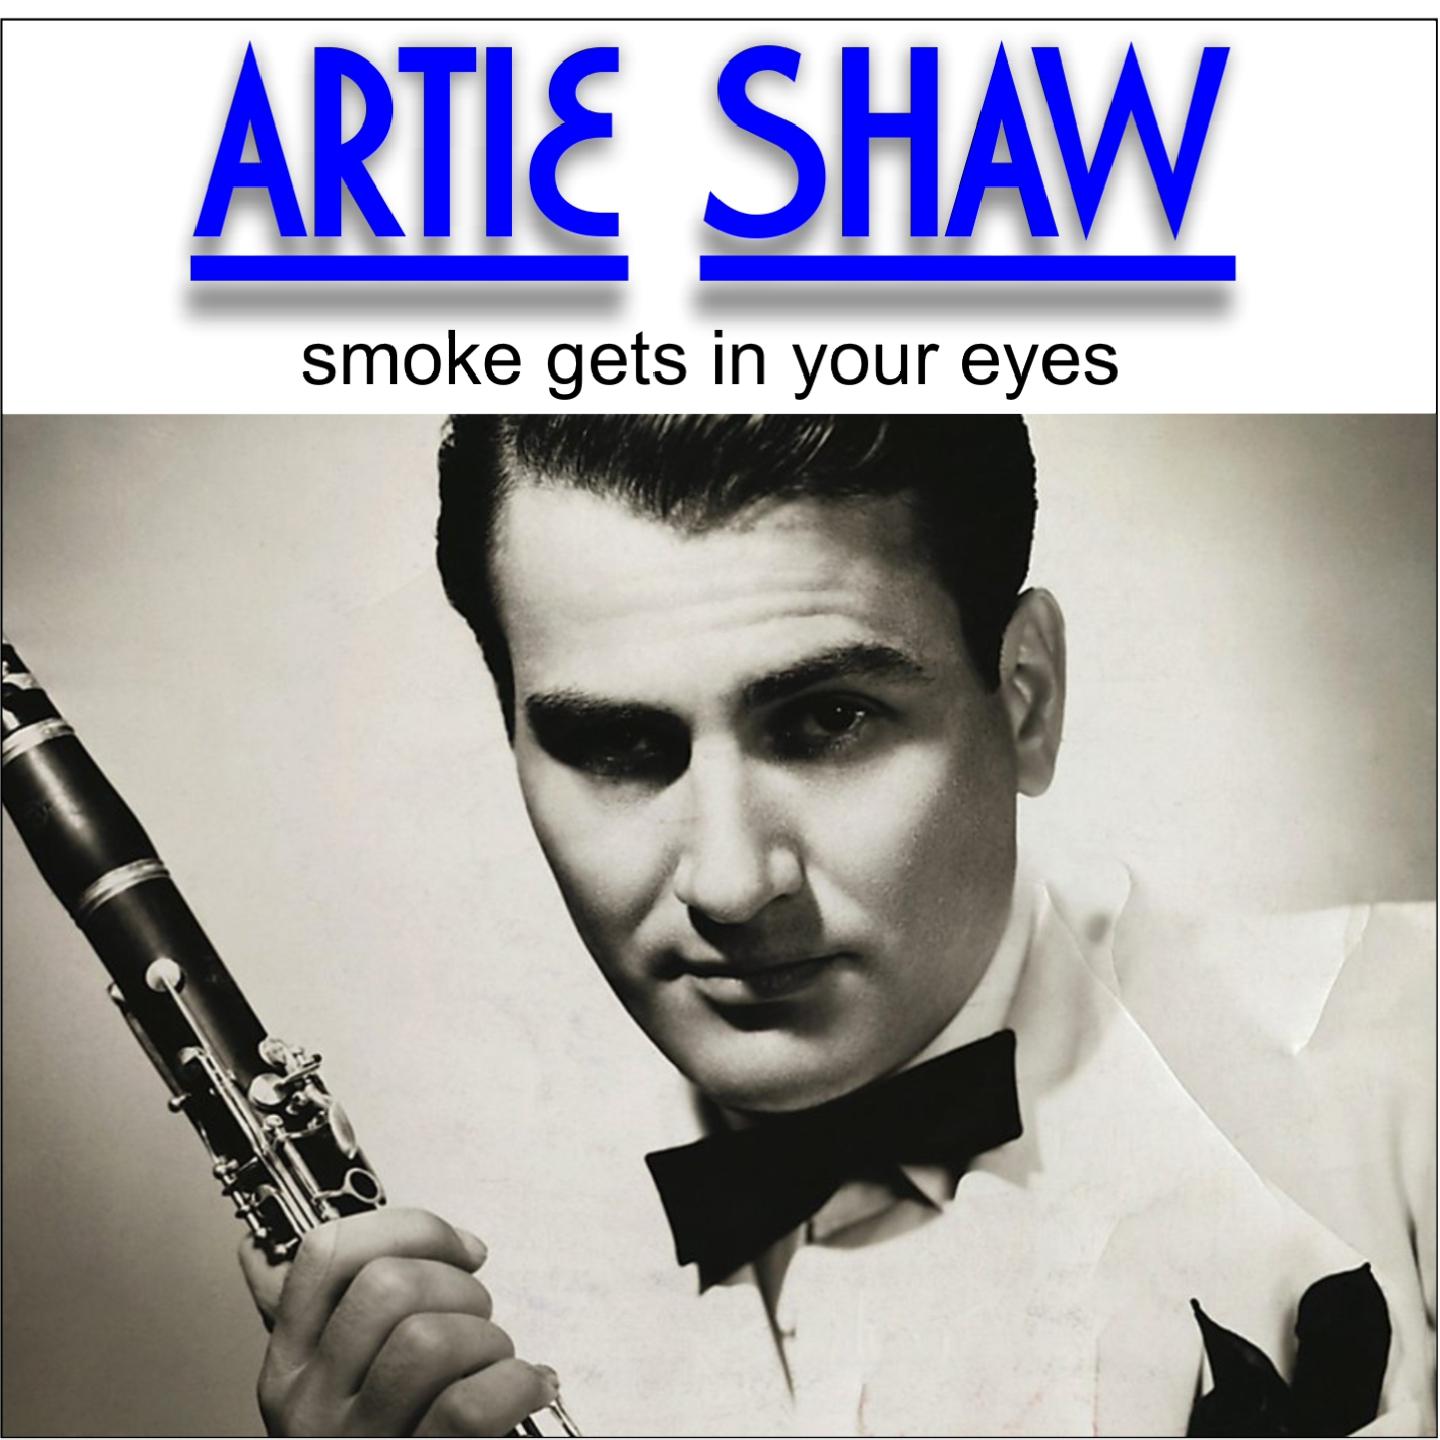 Artie Shaw - Smoke Gets in Your Eyes